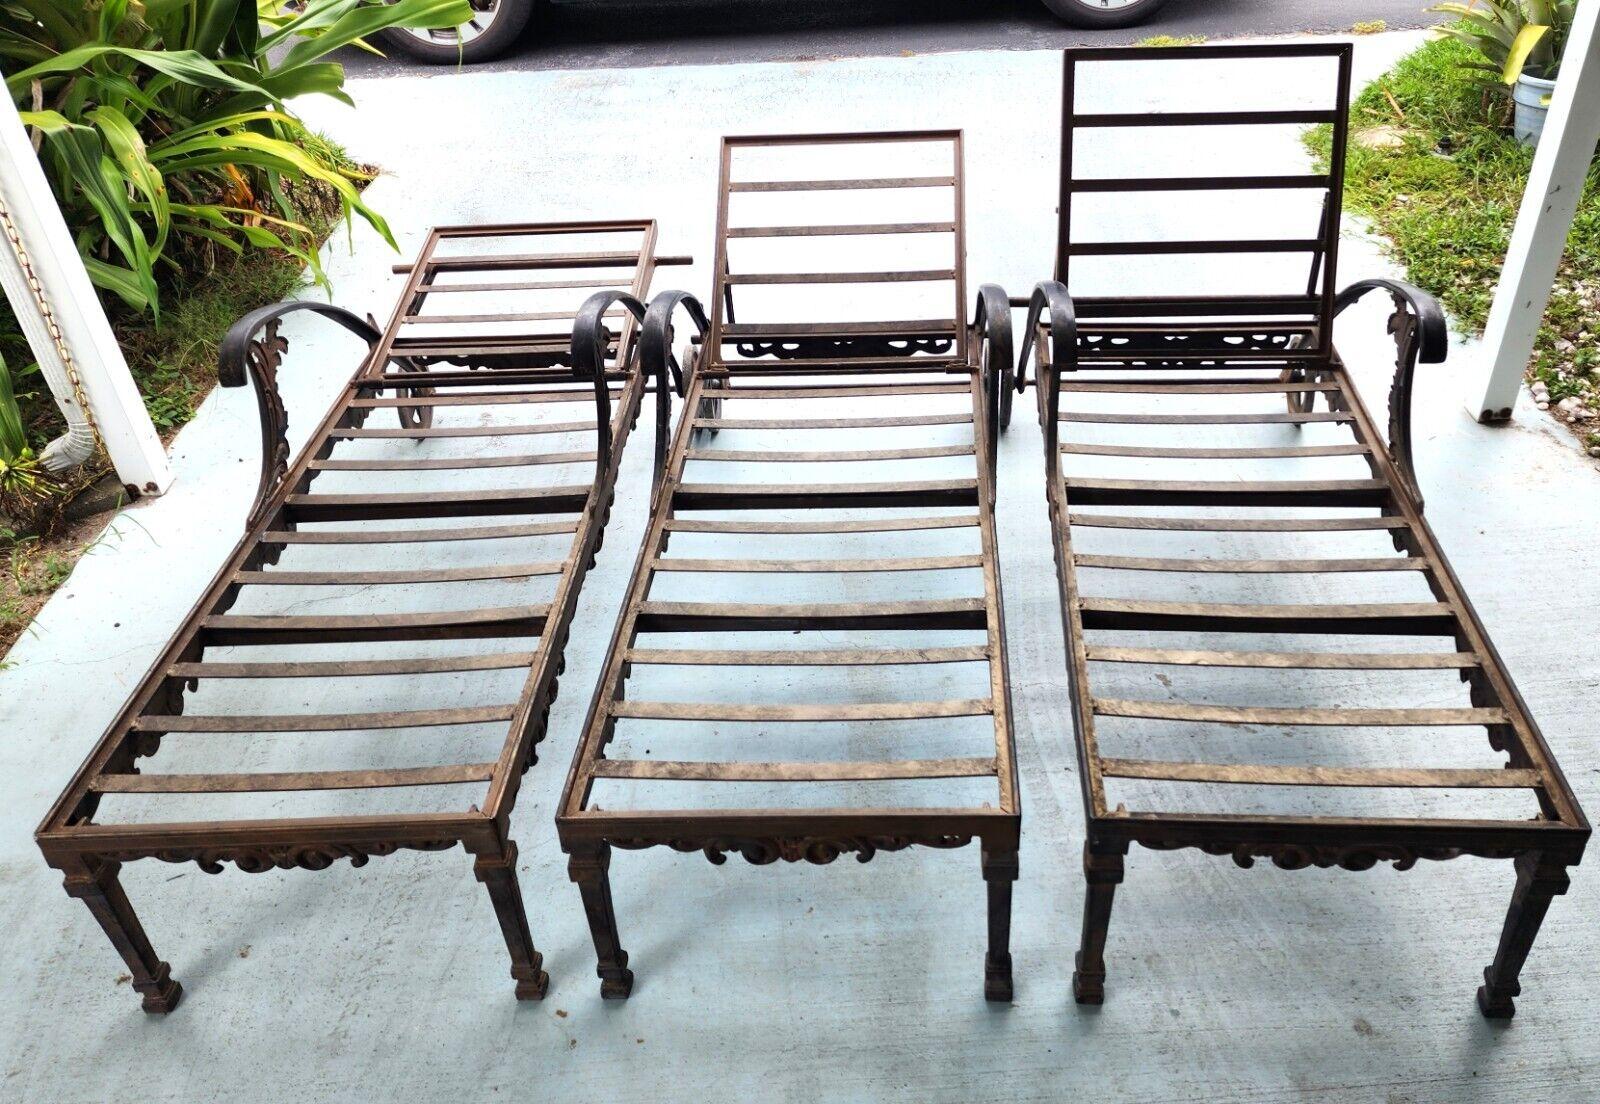 Vintage Chaise Lounges Outdoor Ornate Rustproof For Sale 3